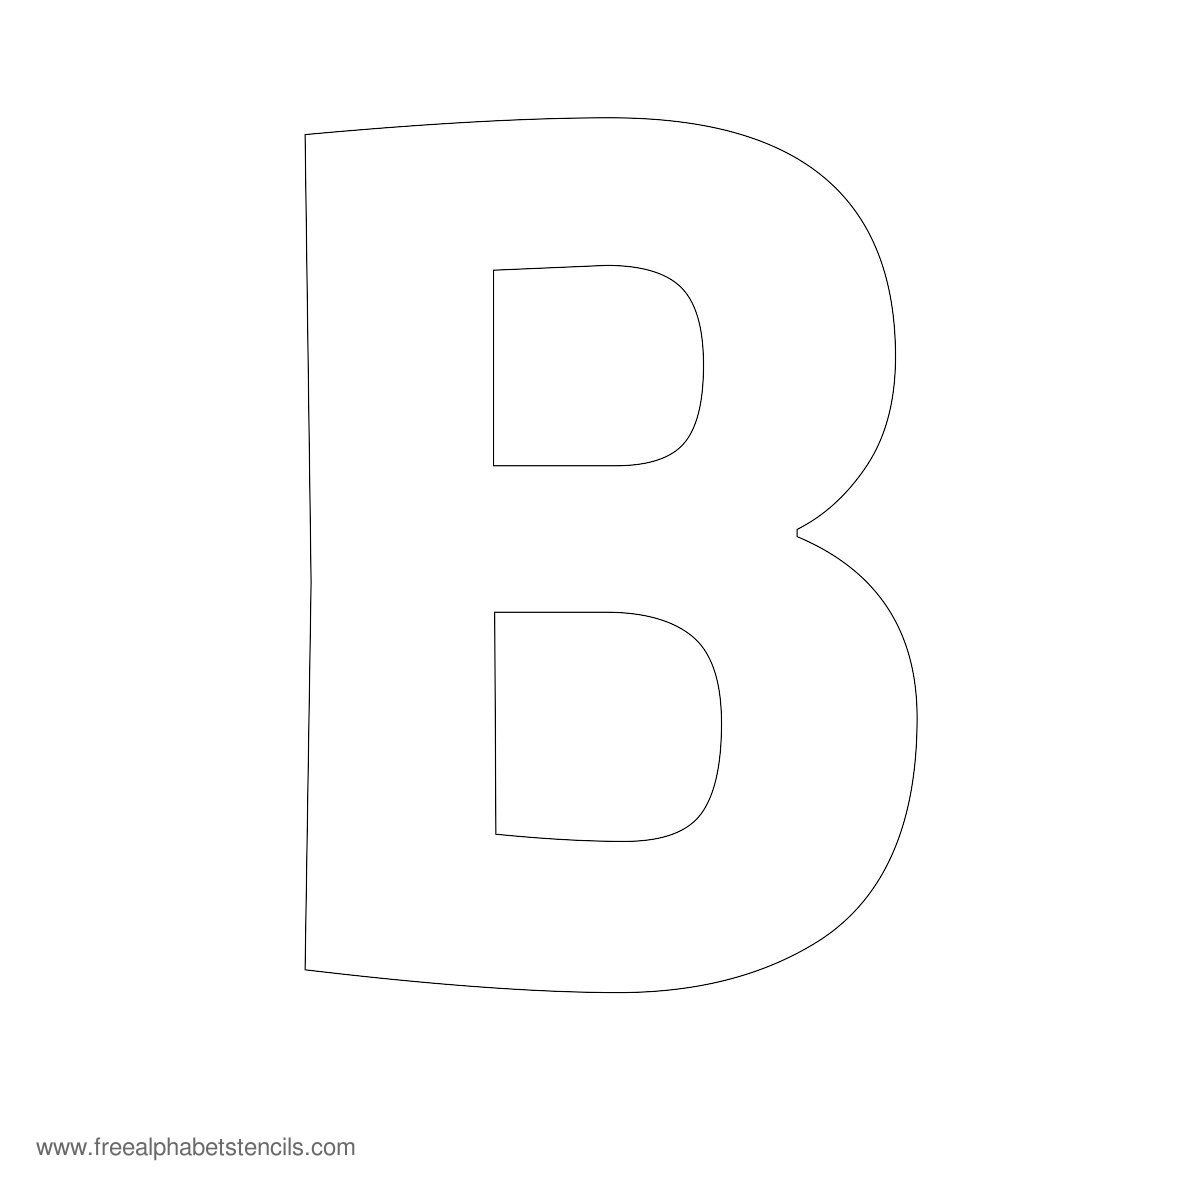 Free Alphabet Letters To Print And Cut Out